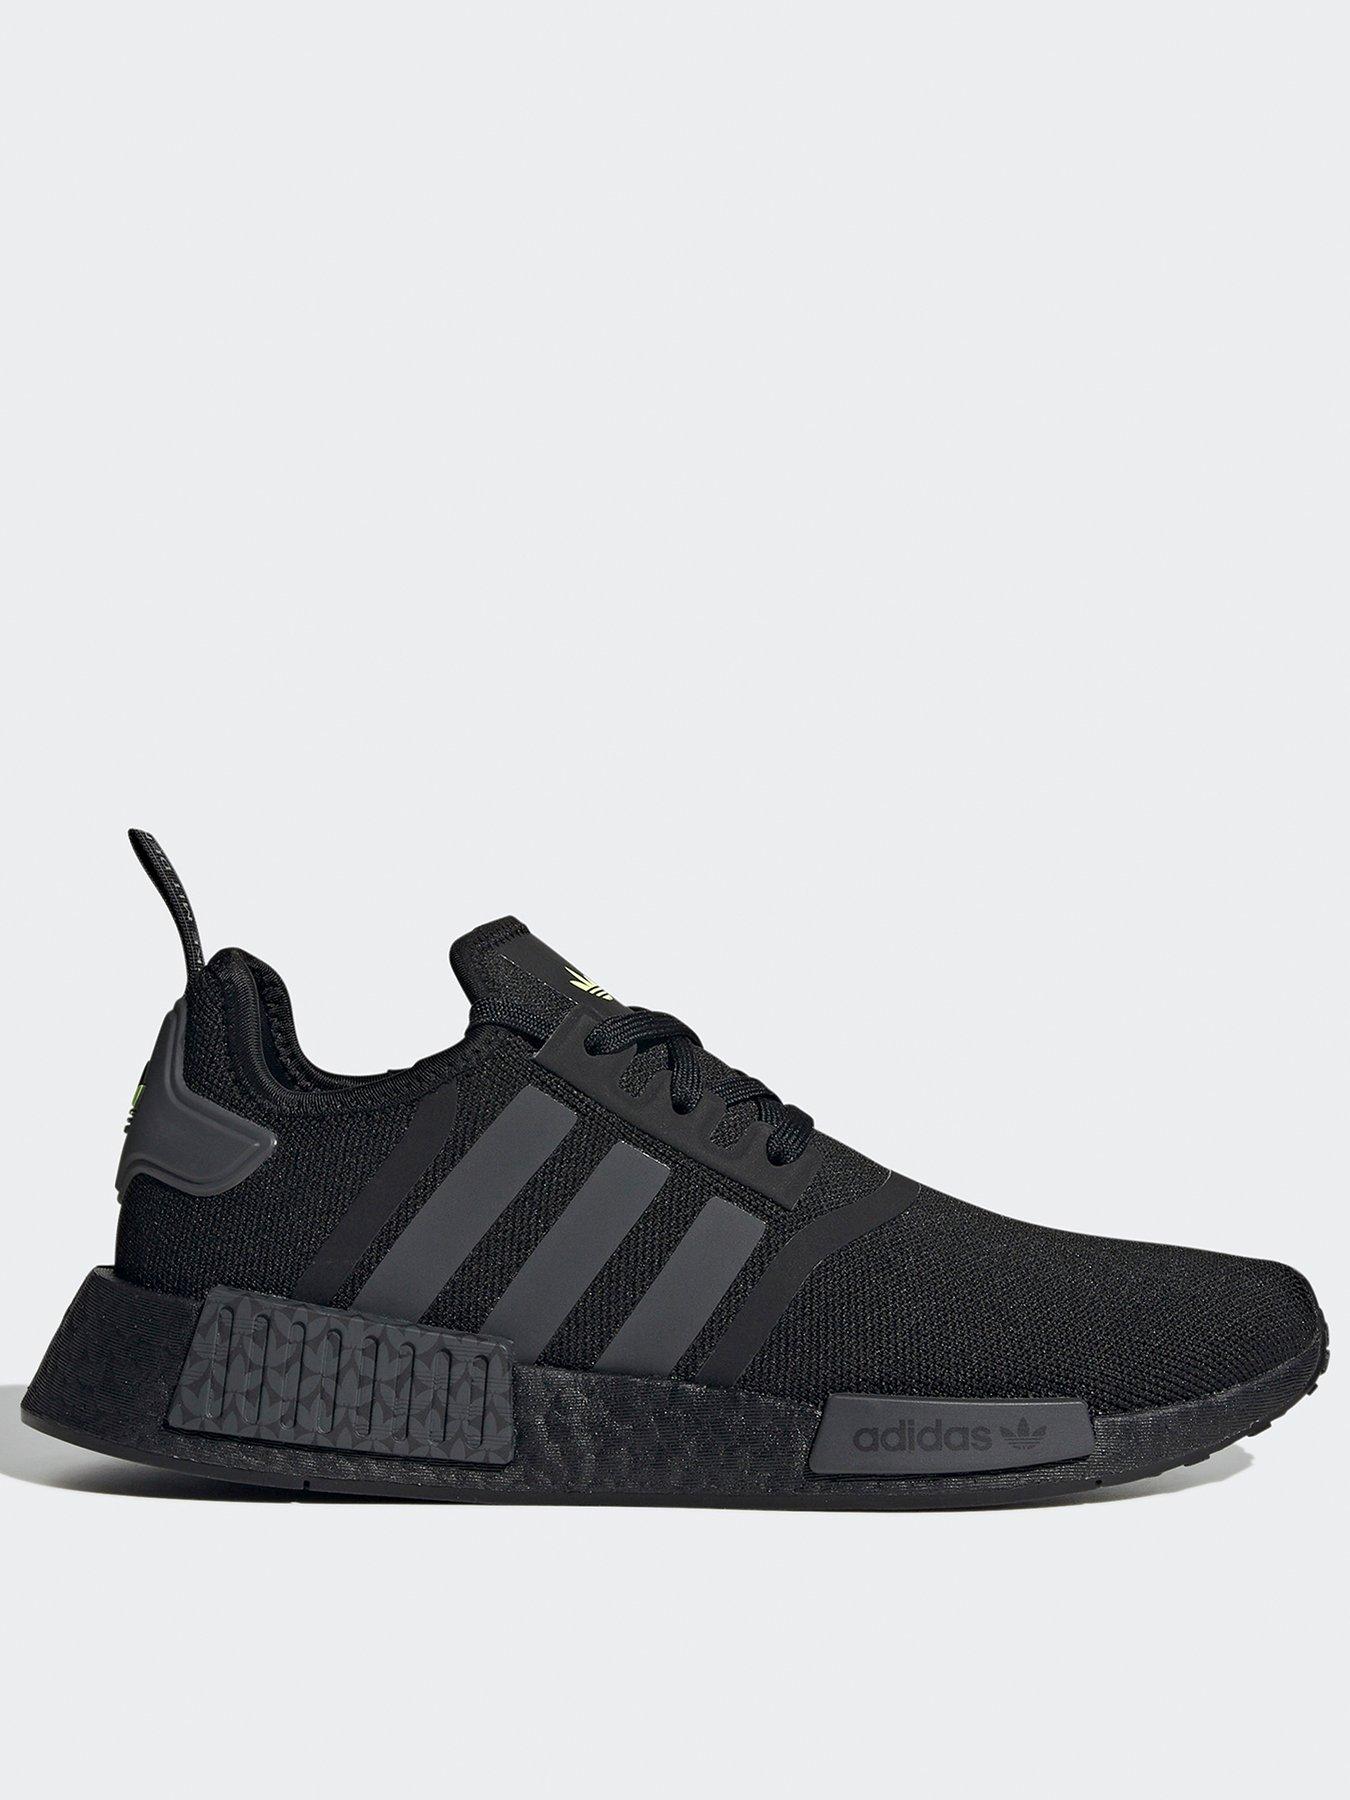 adidas Originals Nmd_R1 Trainers very.co.uk